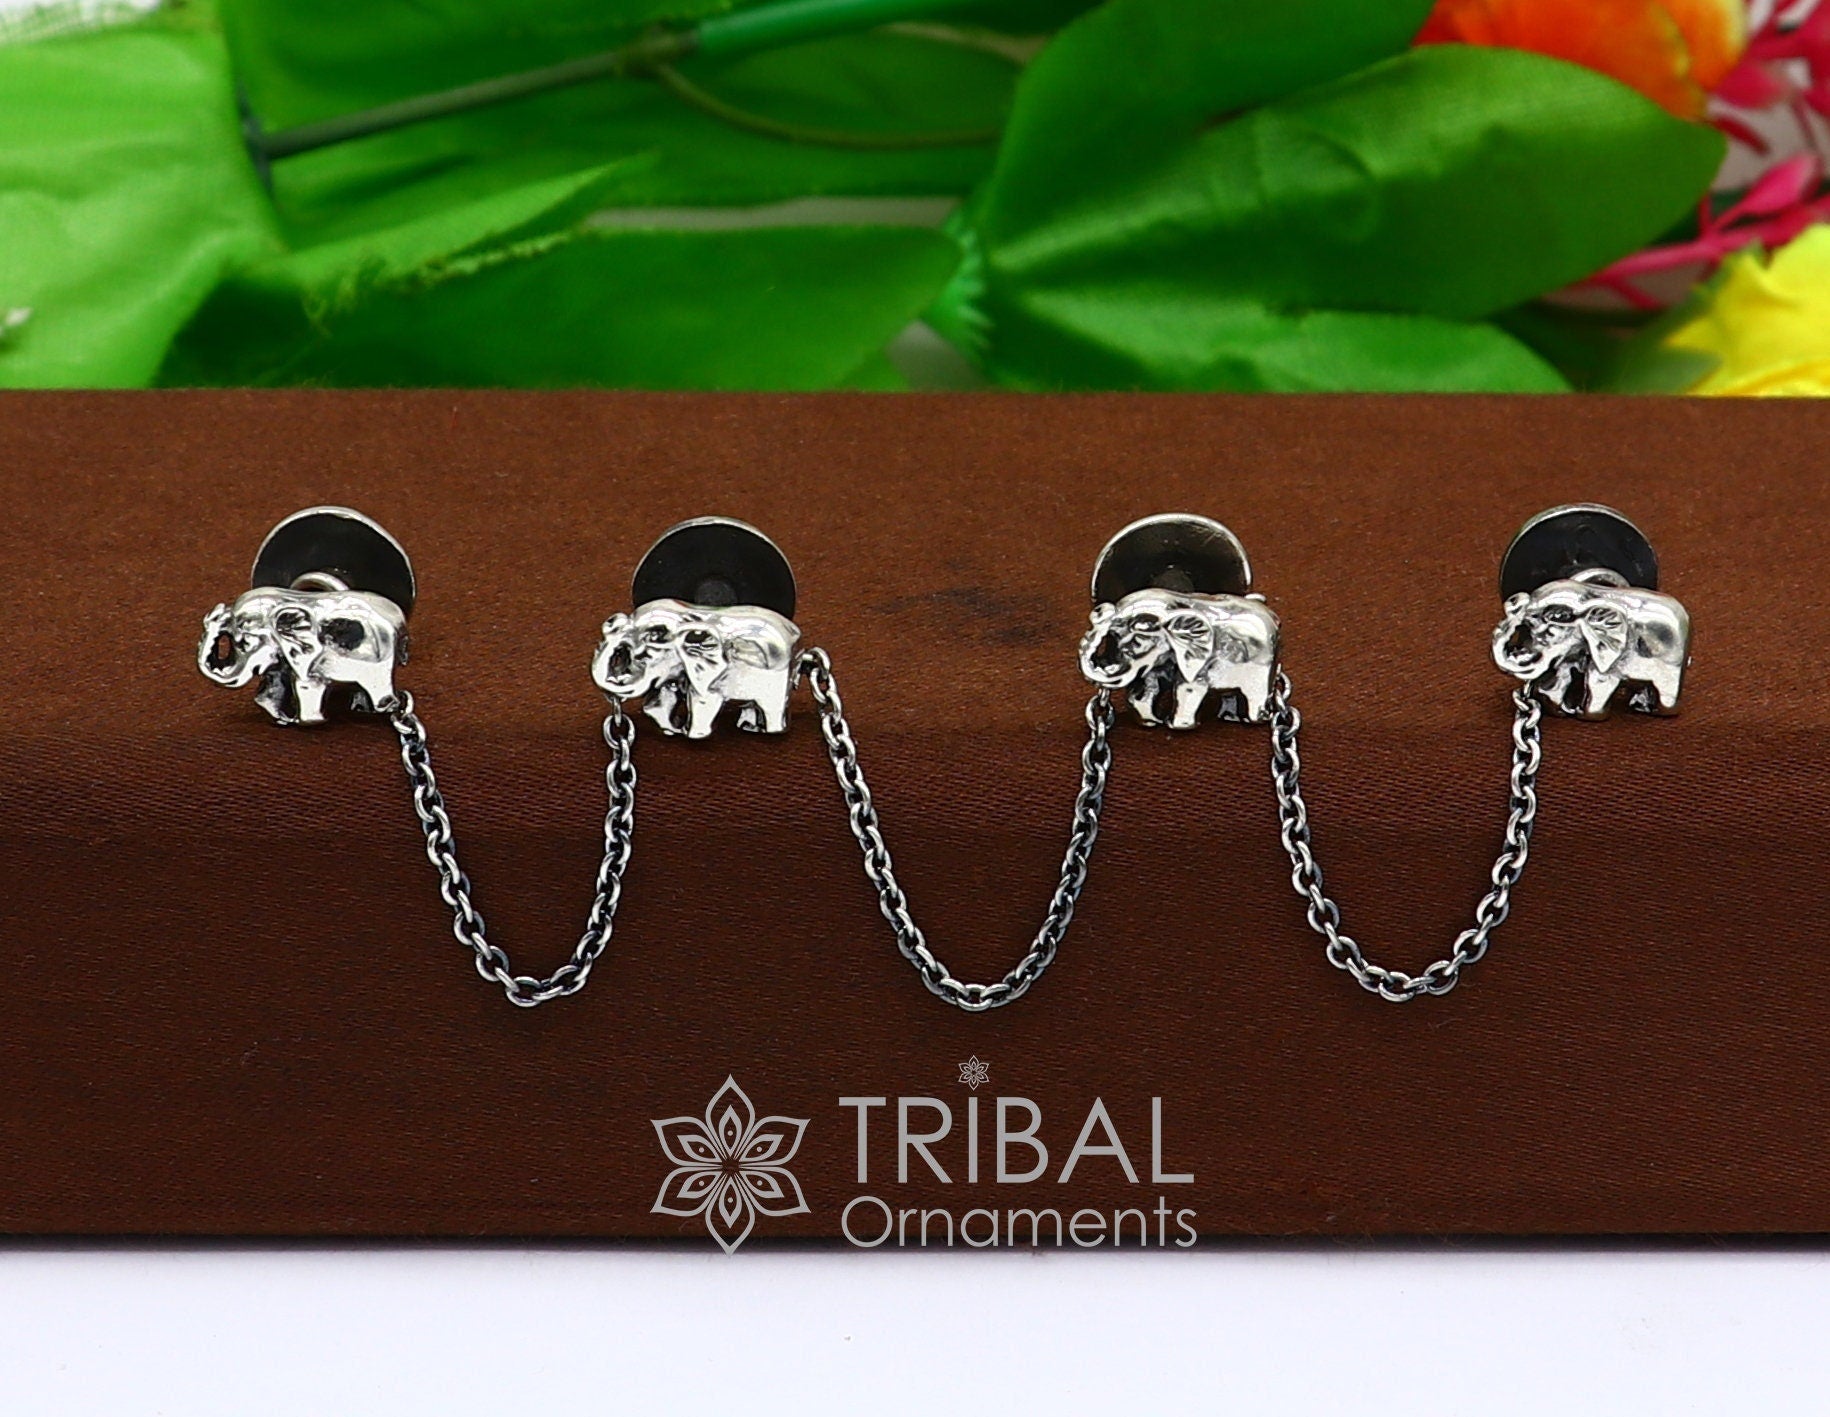 925 Sterling silver handmade amazing unique elephant shape ethnic style design buttons for men's kurta, best gifting accessories btn31 - TRIBAL ORNAMENTS